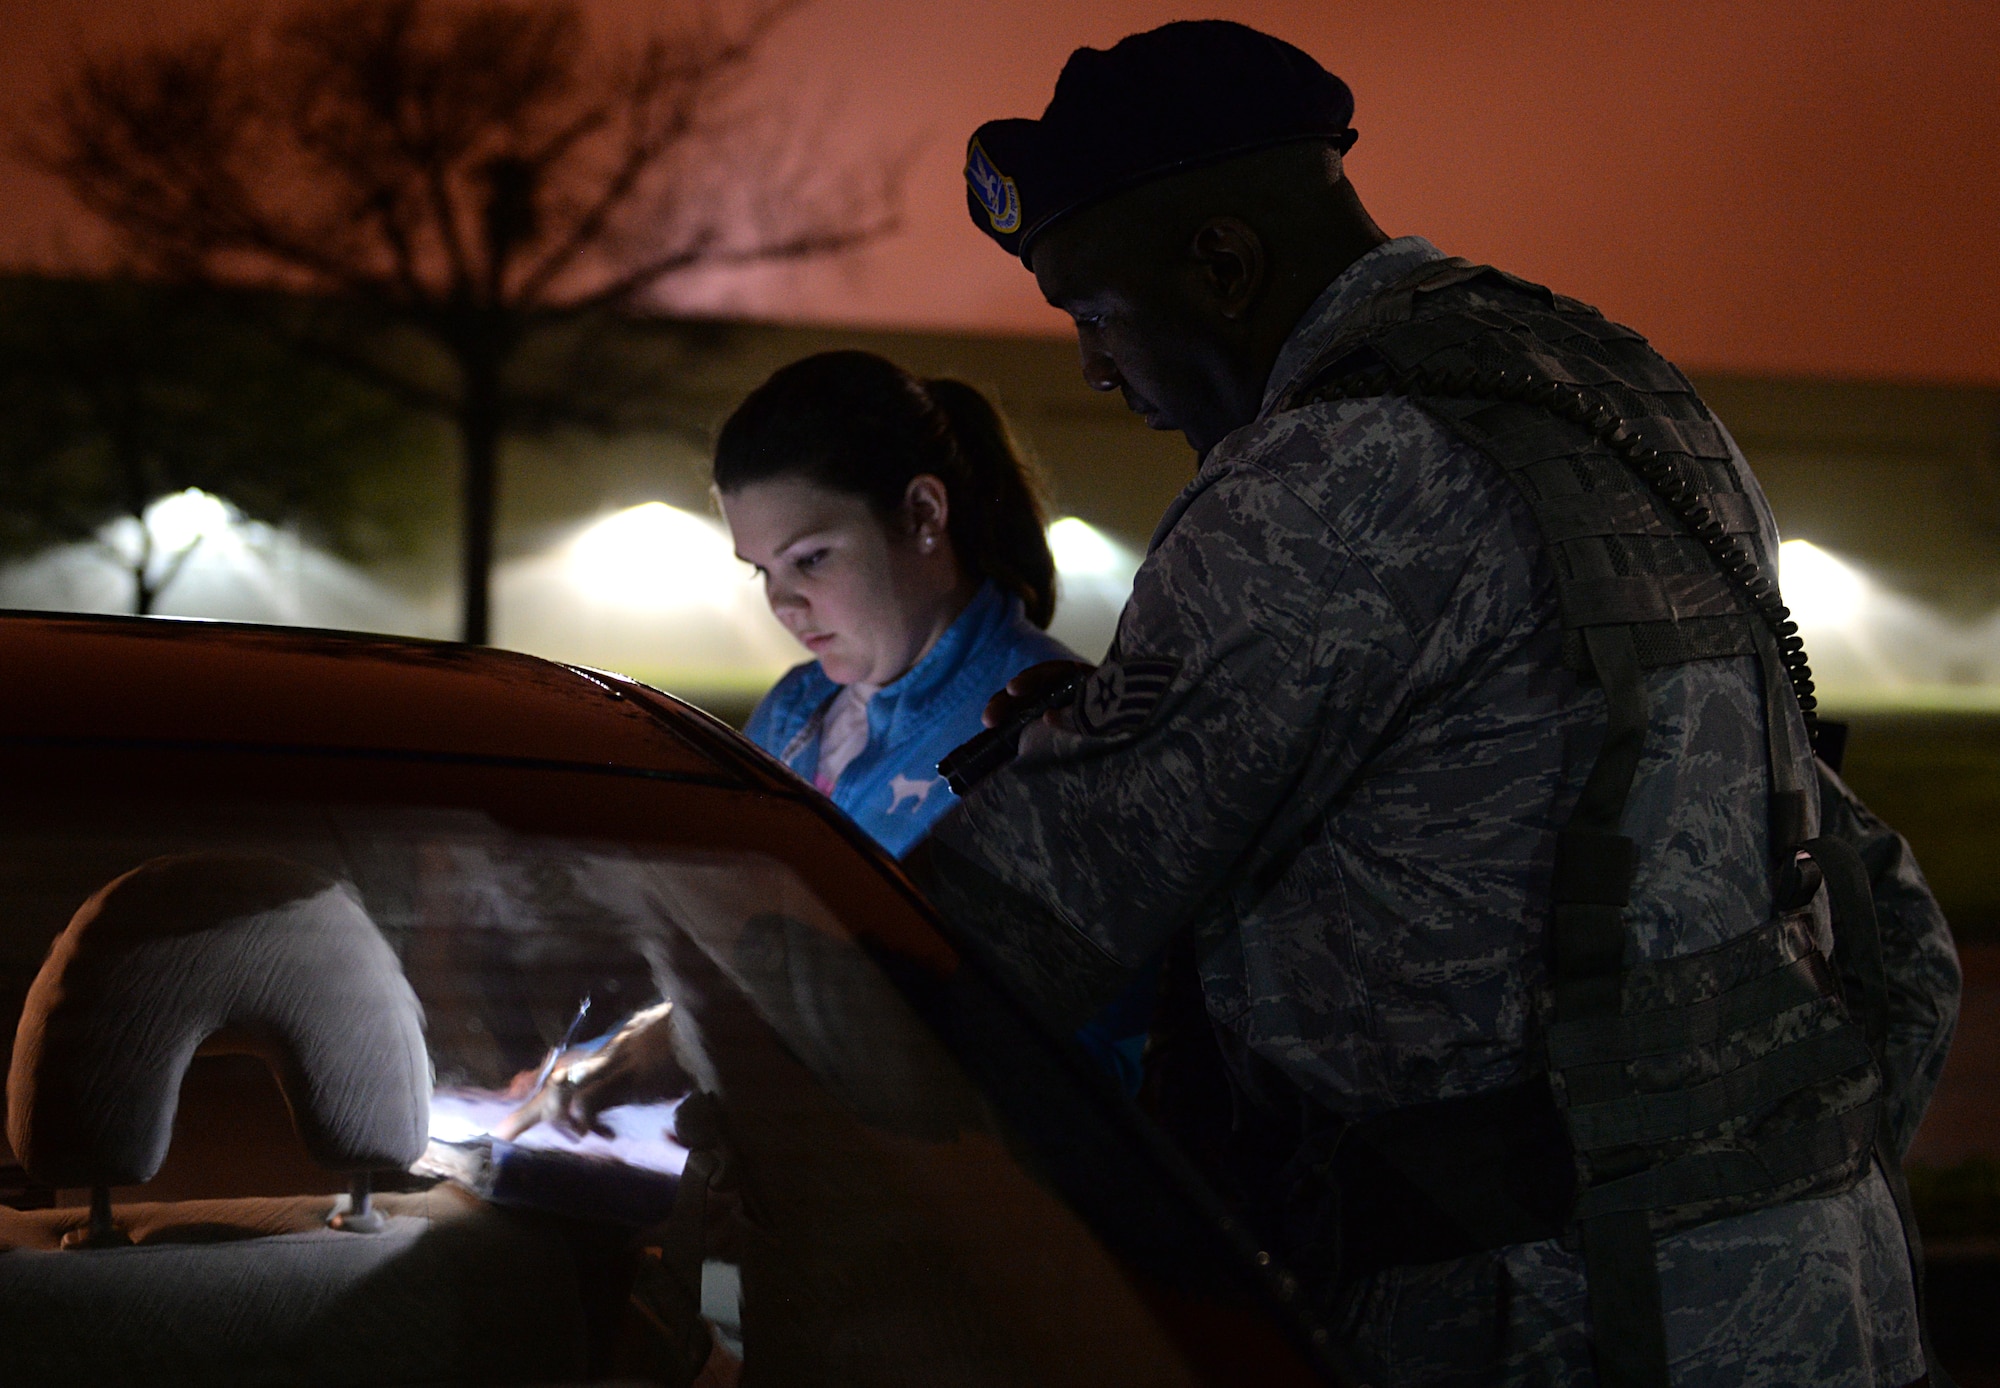 Staff Sgt. Jason Moore, 81st Security Forces patrolman, helps a car accident victim write a statement March 12, 2015, Keesler Air Force Base, Miss. 81st SFS Airmen perform multiple roles to keep members of Keesler safe, ranging from identification checks at base entrances to searching for explosives and narcotics with military working dogs. (U.S. Air Force photo by Senior Airman Holly Mansfield)